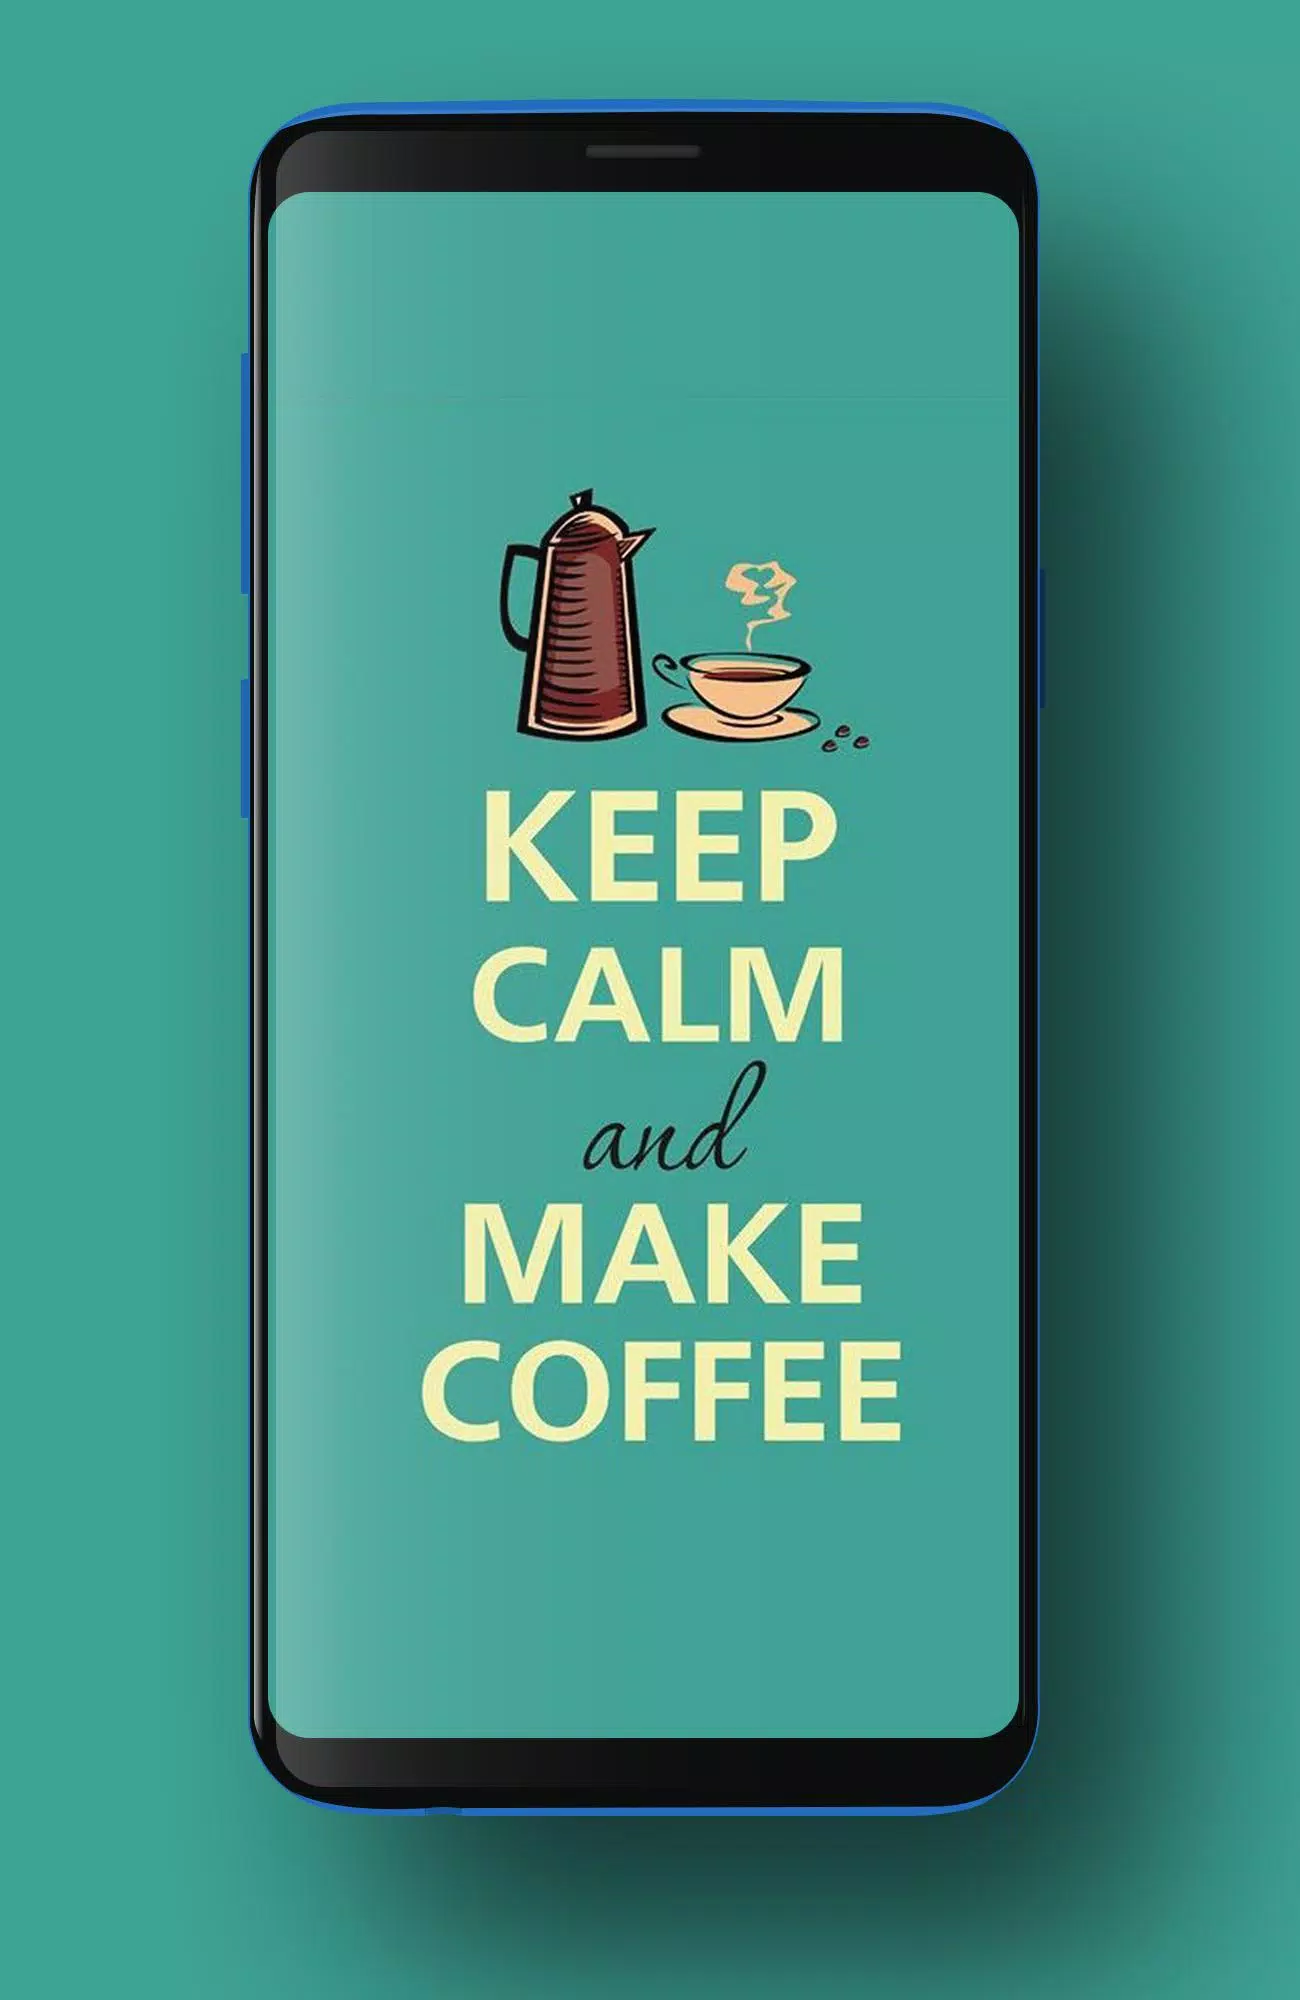 Keep calm wallpapers hd apk for android download